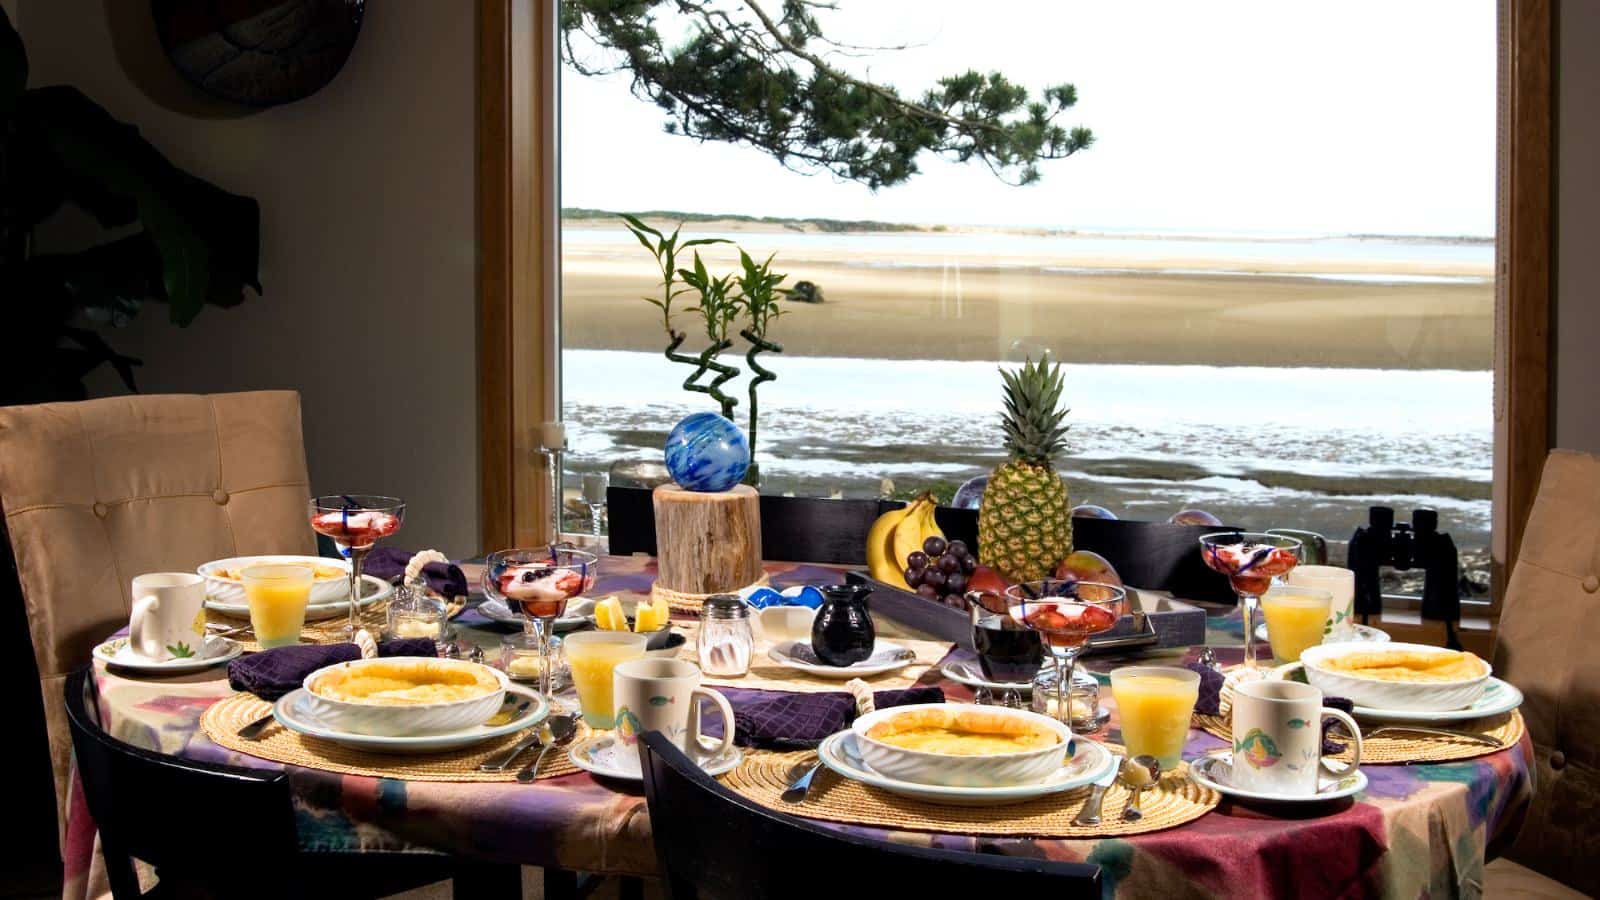 Dining table with five place settings with breakfast dishes and a large window with view of the beach